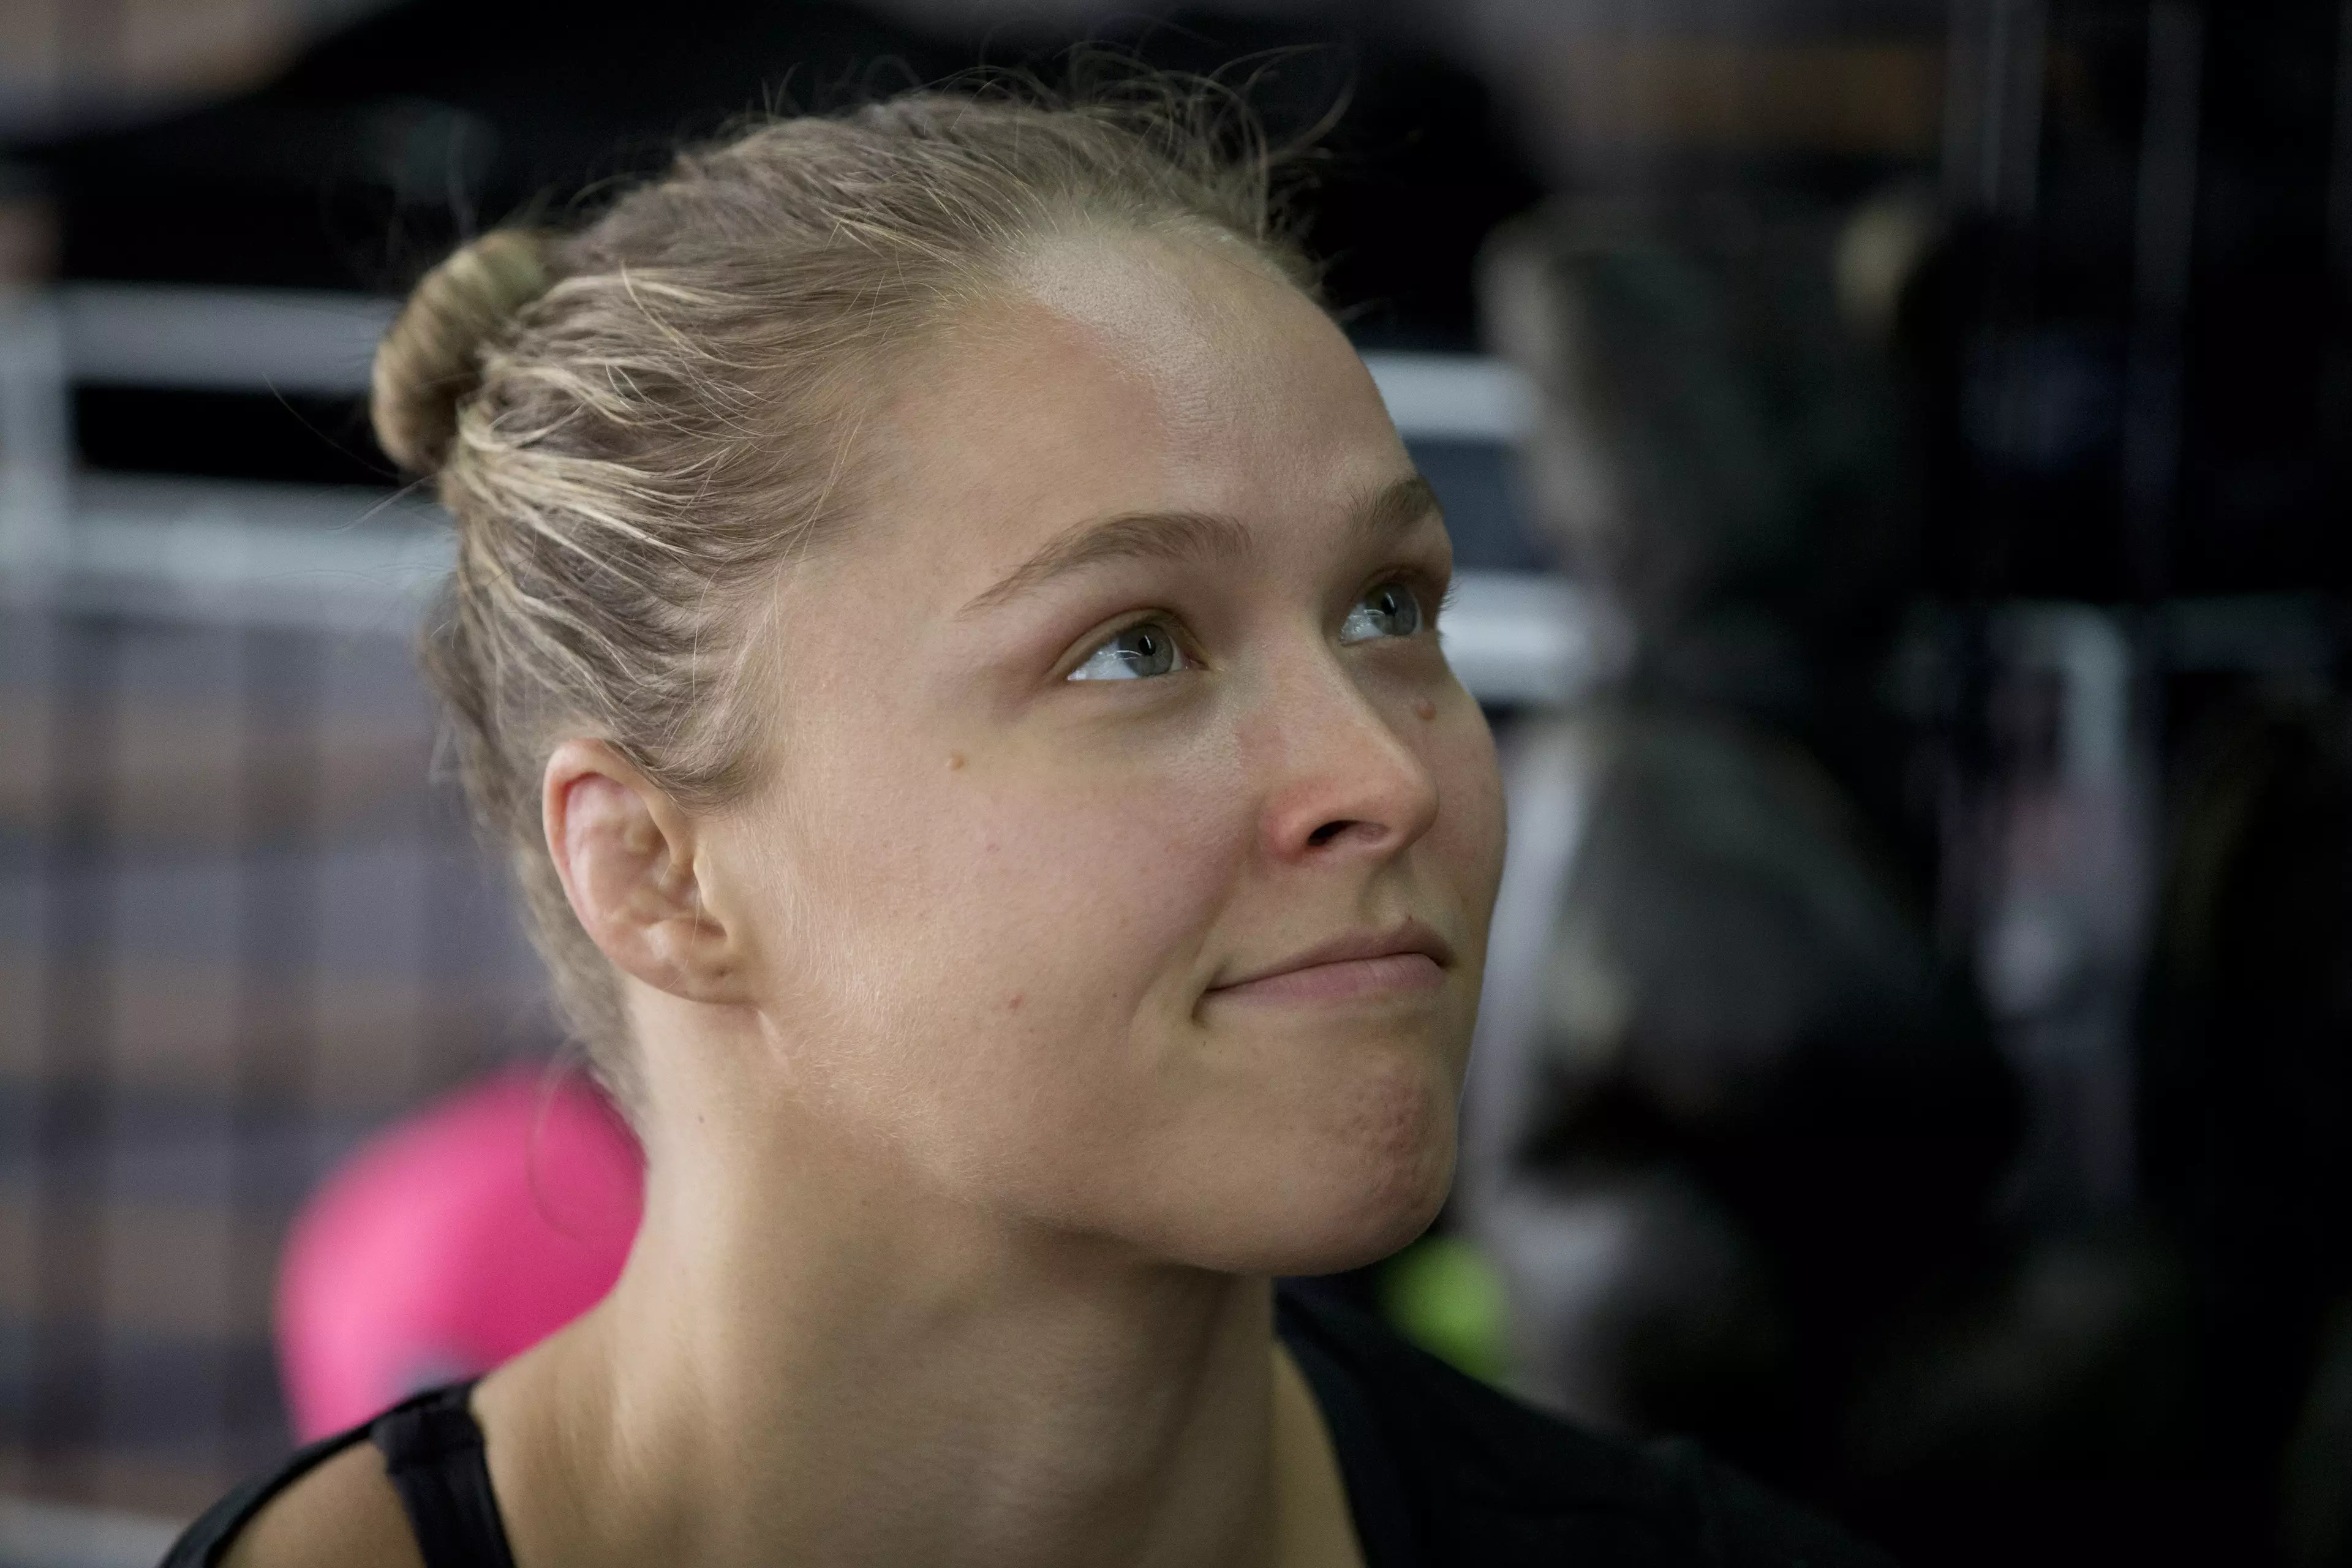 A Healthy Ronda Rousey Eats Apple Like An Unhinged Fruit-Consuming Savage